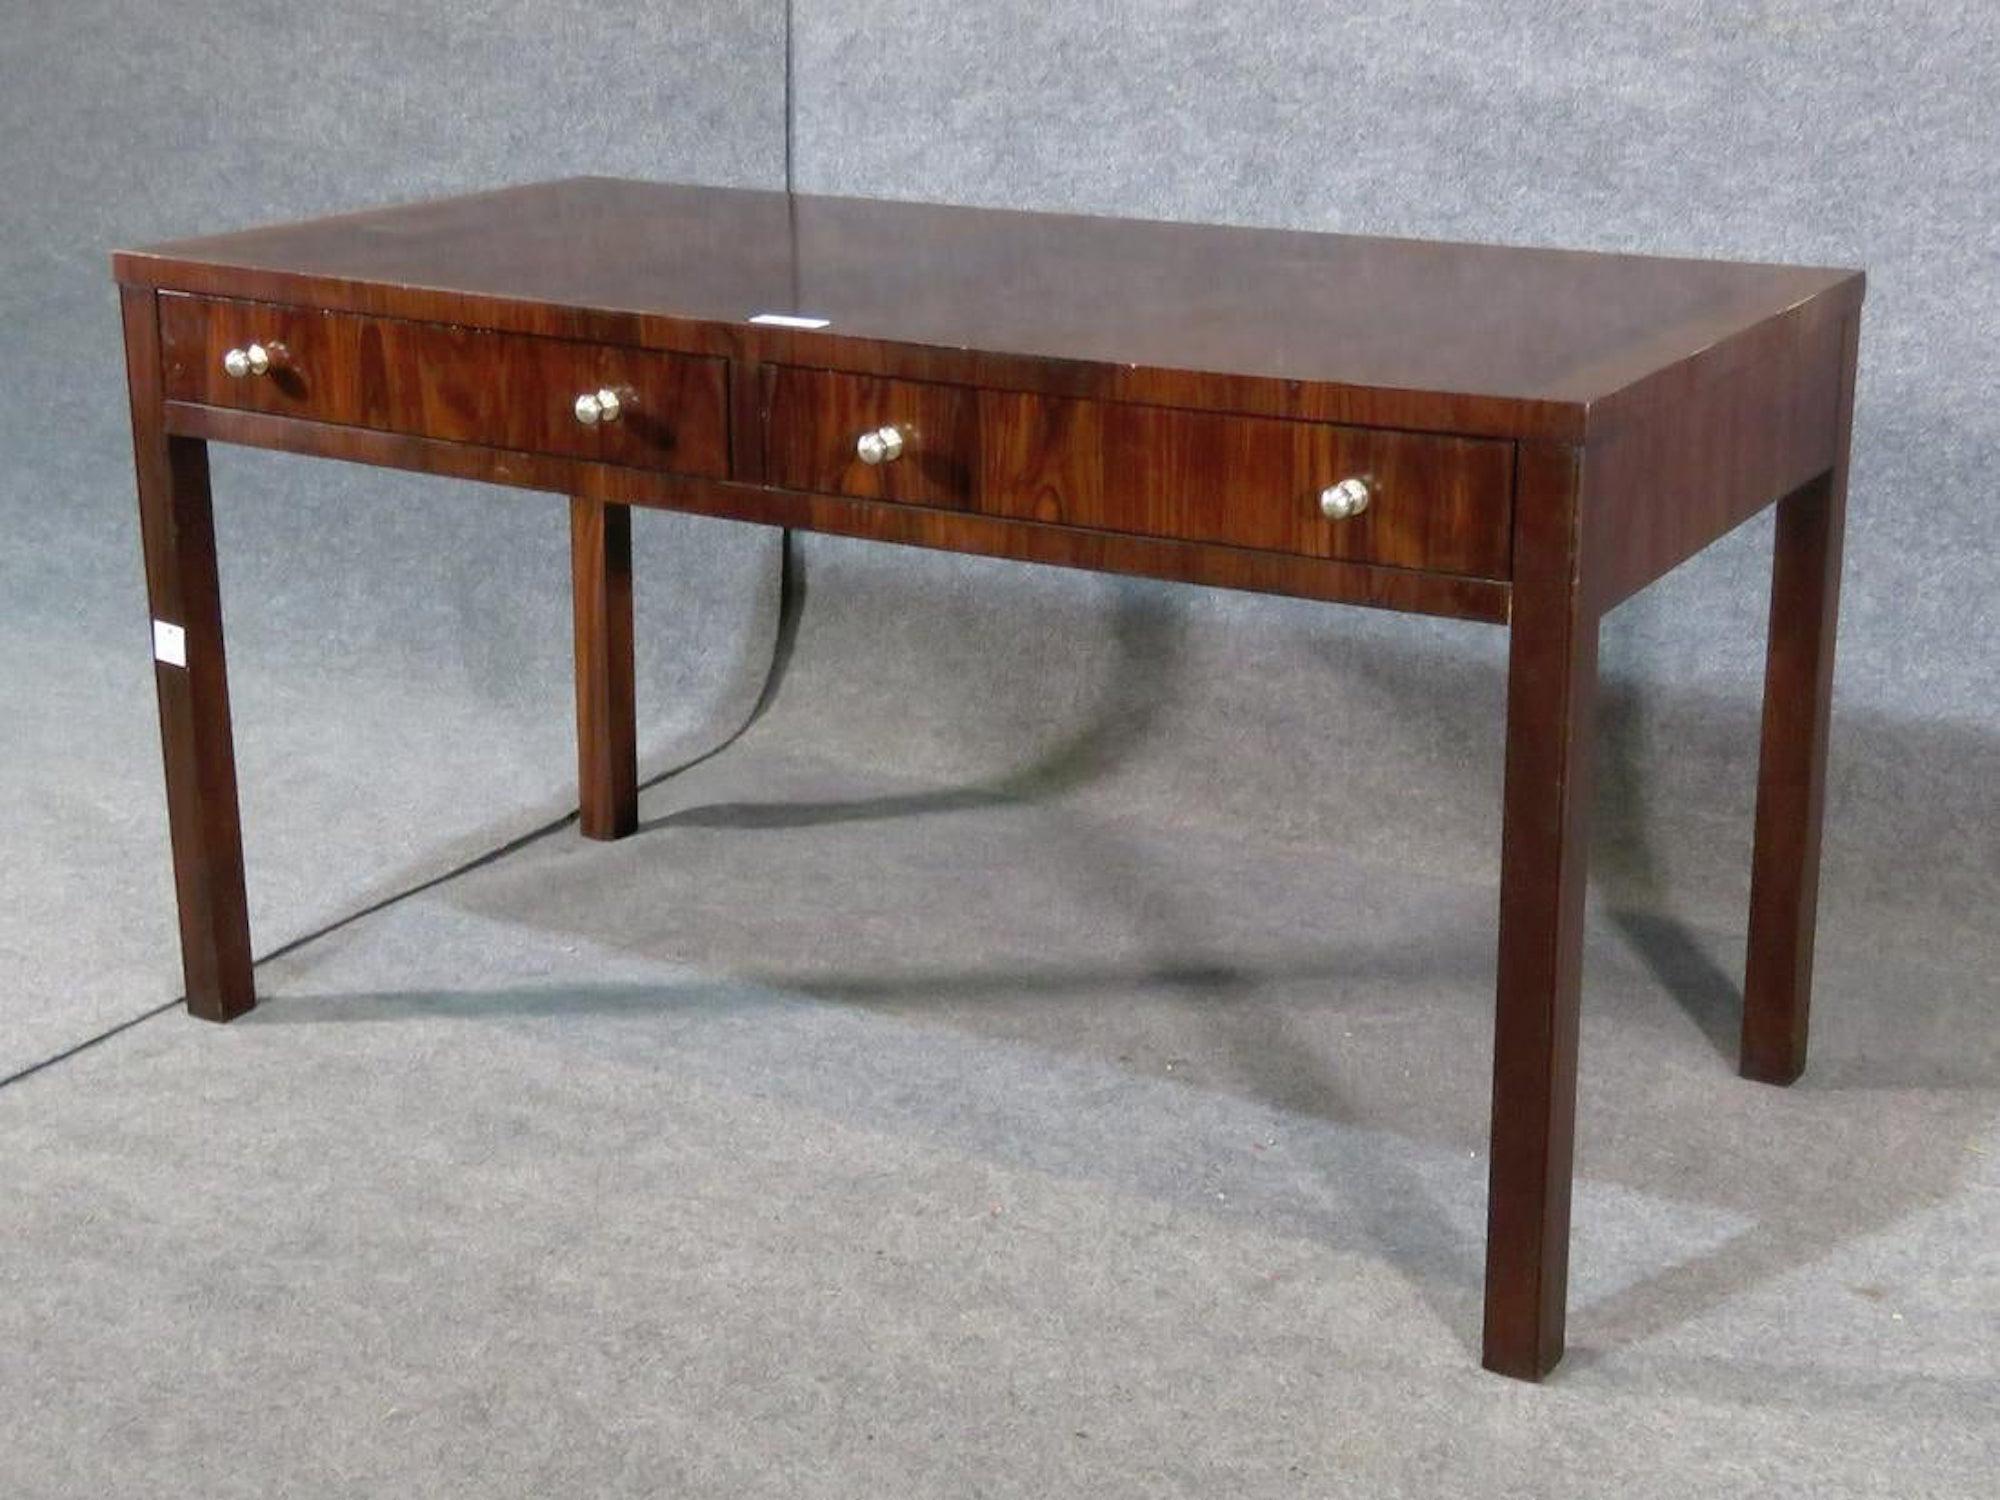 Midcentury desk in rosewood grain with two drawers.
(Please confirm item location - NY or NJ - with dealer).
  